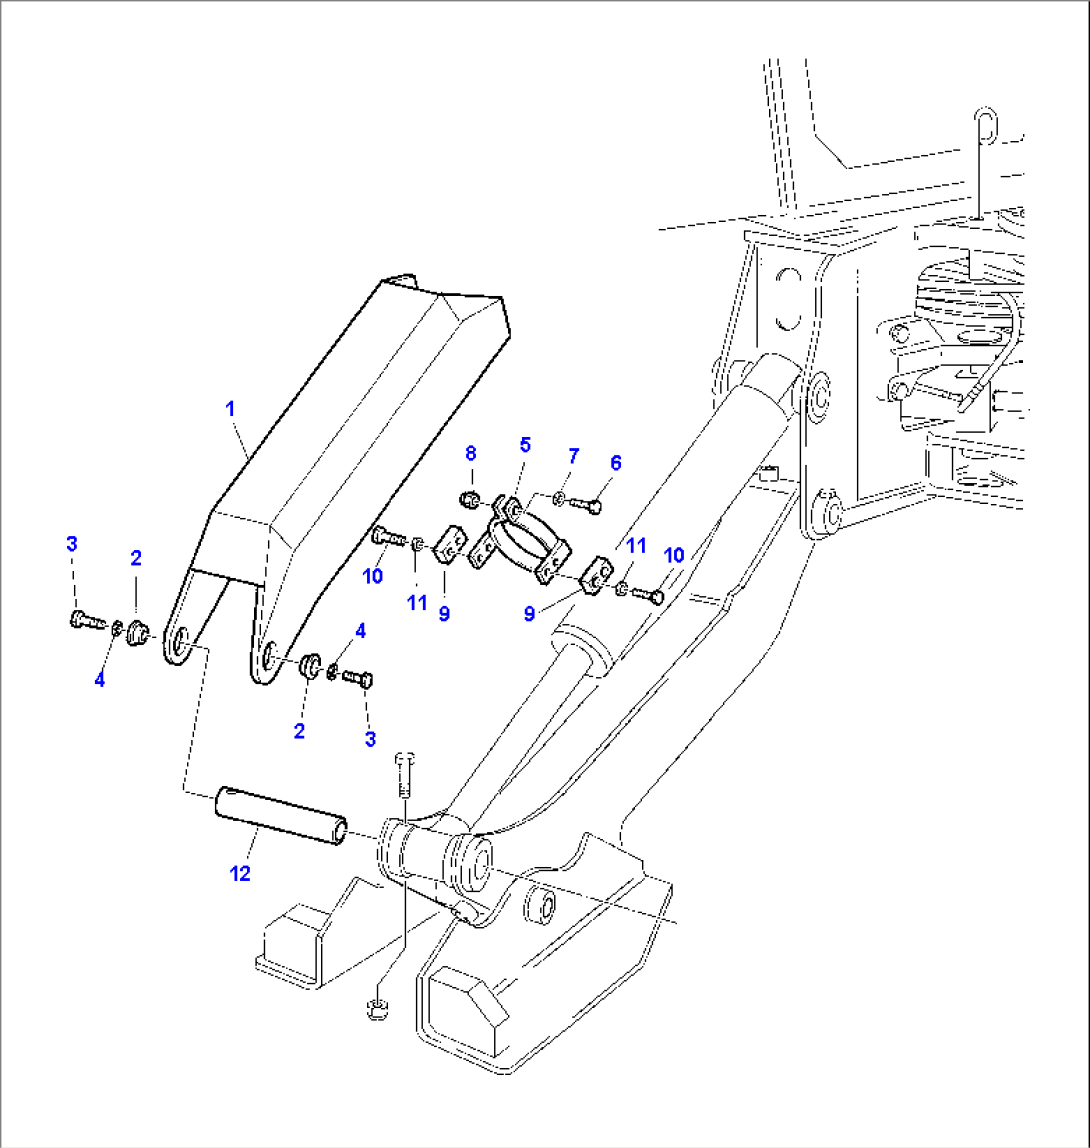 HORIZONTAL OUTRIGGER CYLINDER PROTECTION